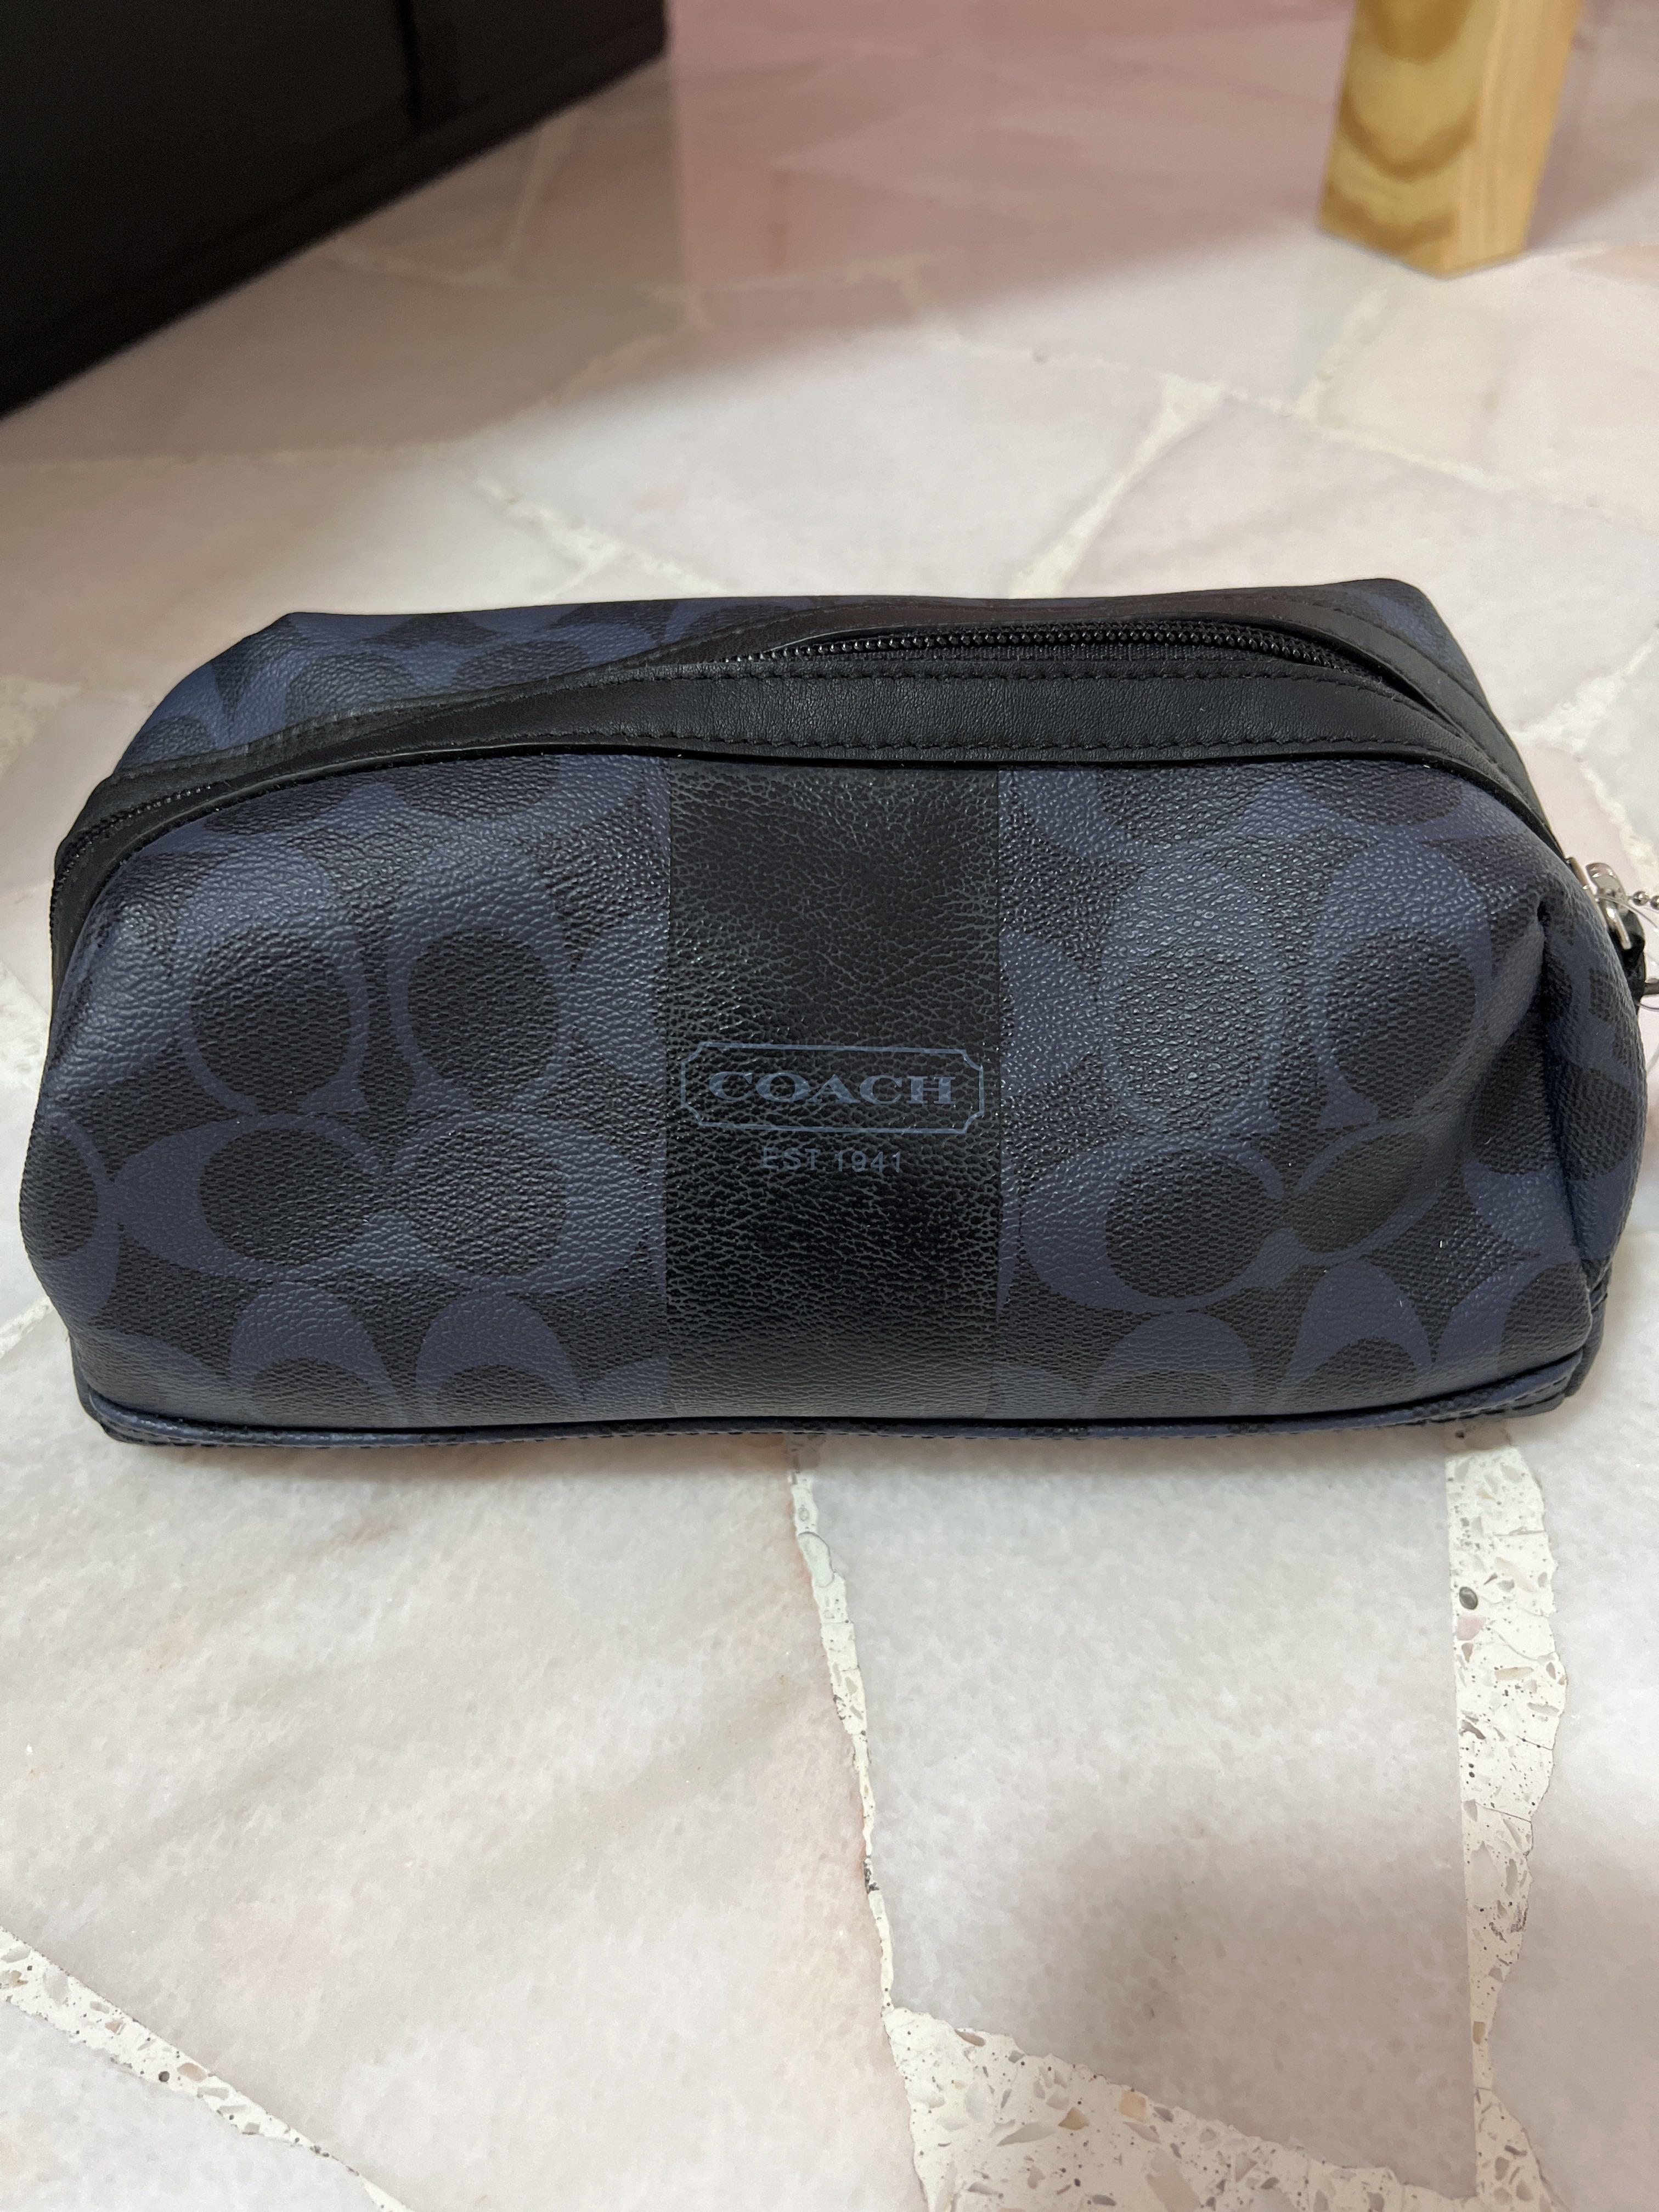 Coach travel kit brand new with tag, Men's Fashion, Bags, Belt bags ...